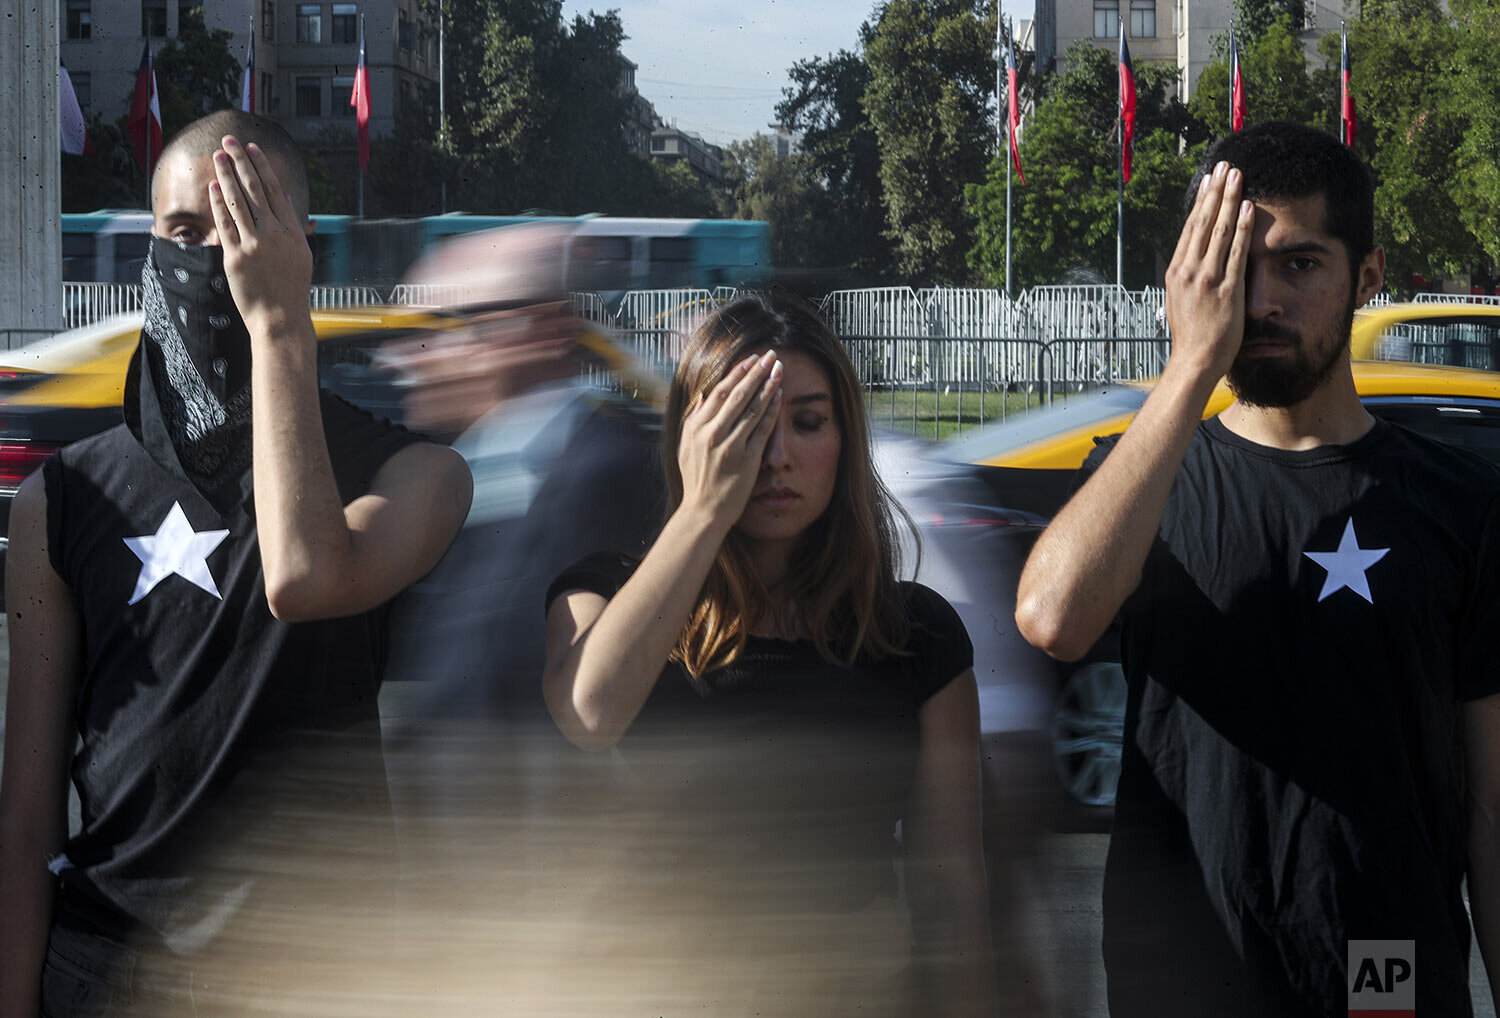  People take part in a street performance to protest President Sebastian Pinera's second year in office, outside La Moneda presidential palace in Santiago, Chile, March 11, 2020. (AP Photo/Esteban Felix) 